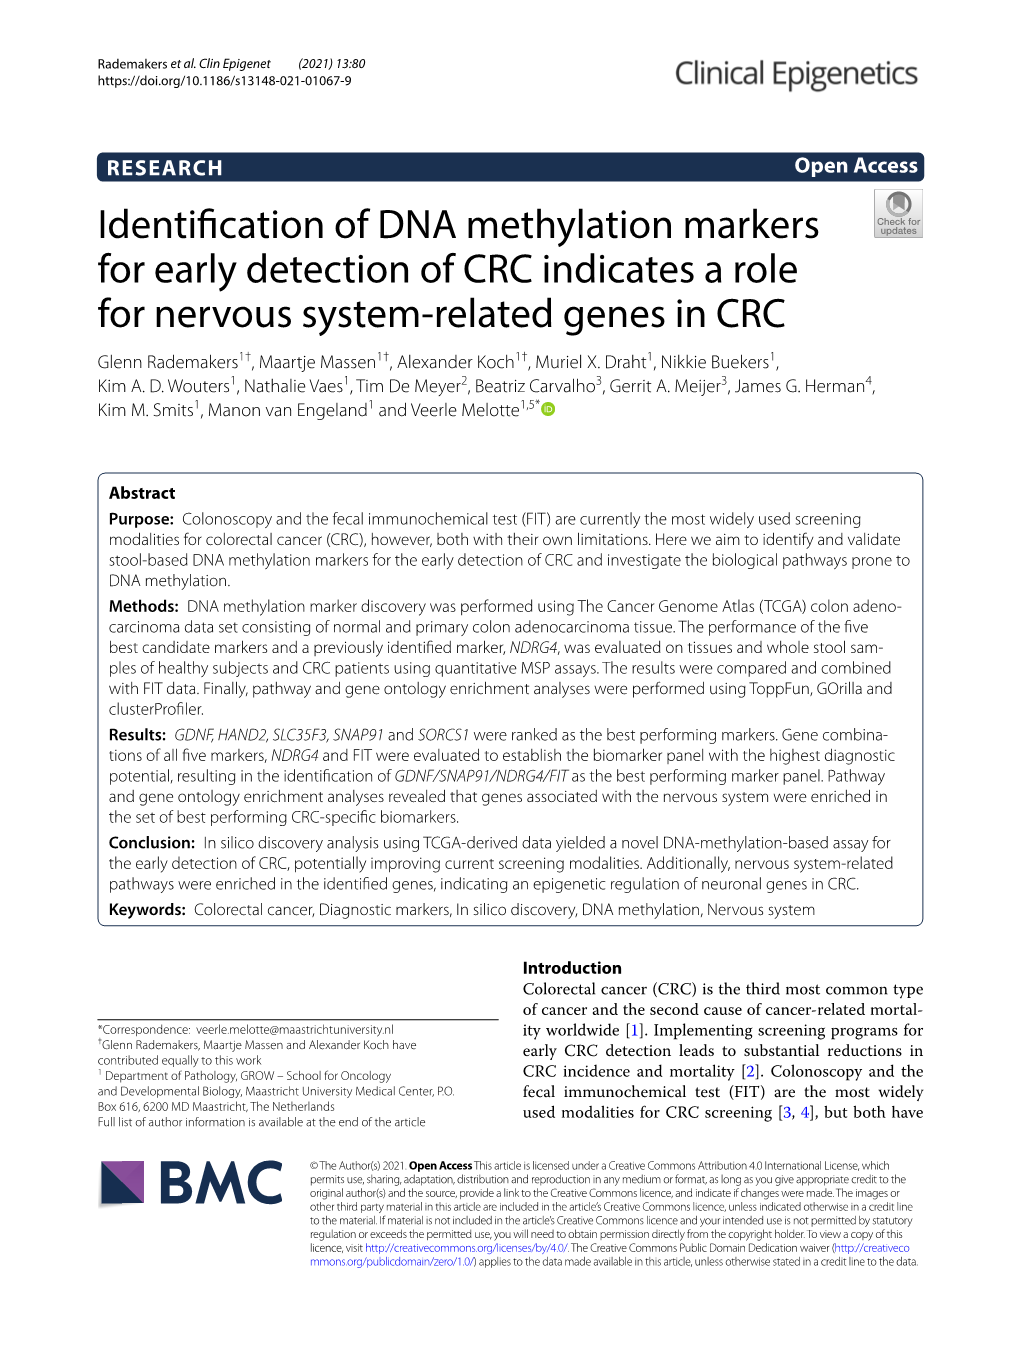 Identification of DNA Methylation Markers for Early Detection of CRC Indicates a Role for Nervous System-Related Genes In